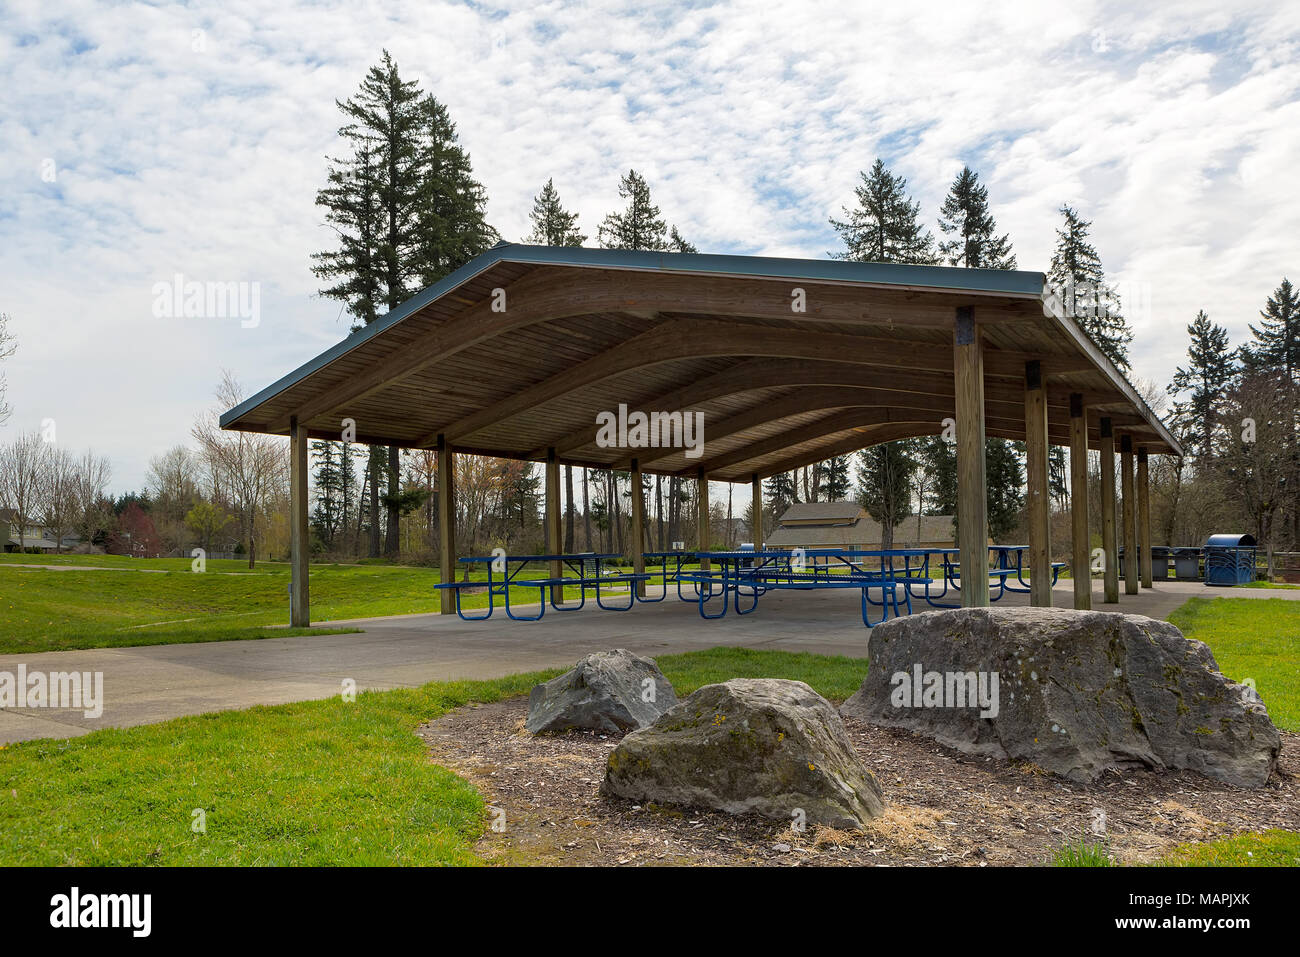 Picnic tables under wood shelter structure in suburban neighborhood city park Stock Photo